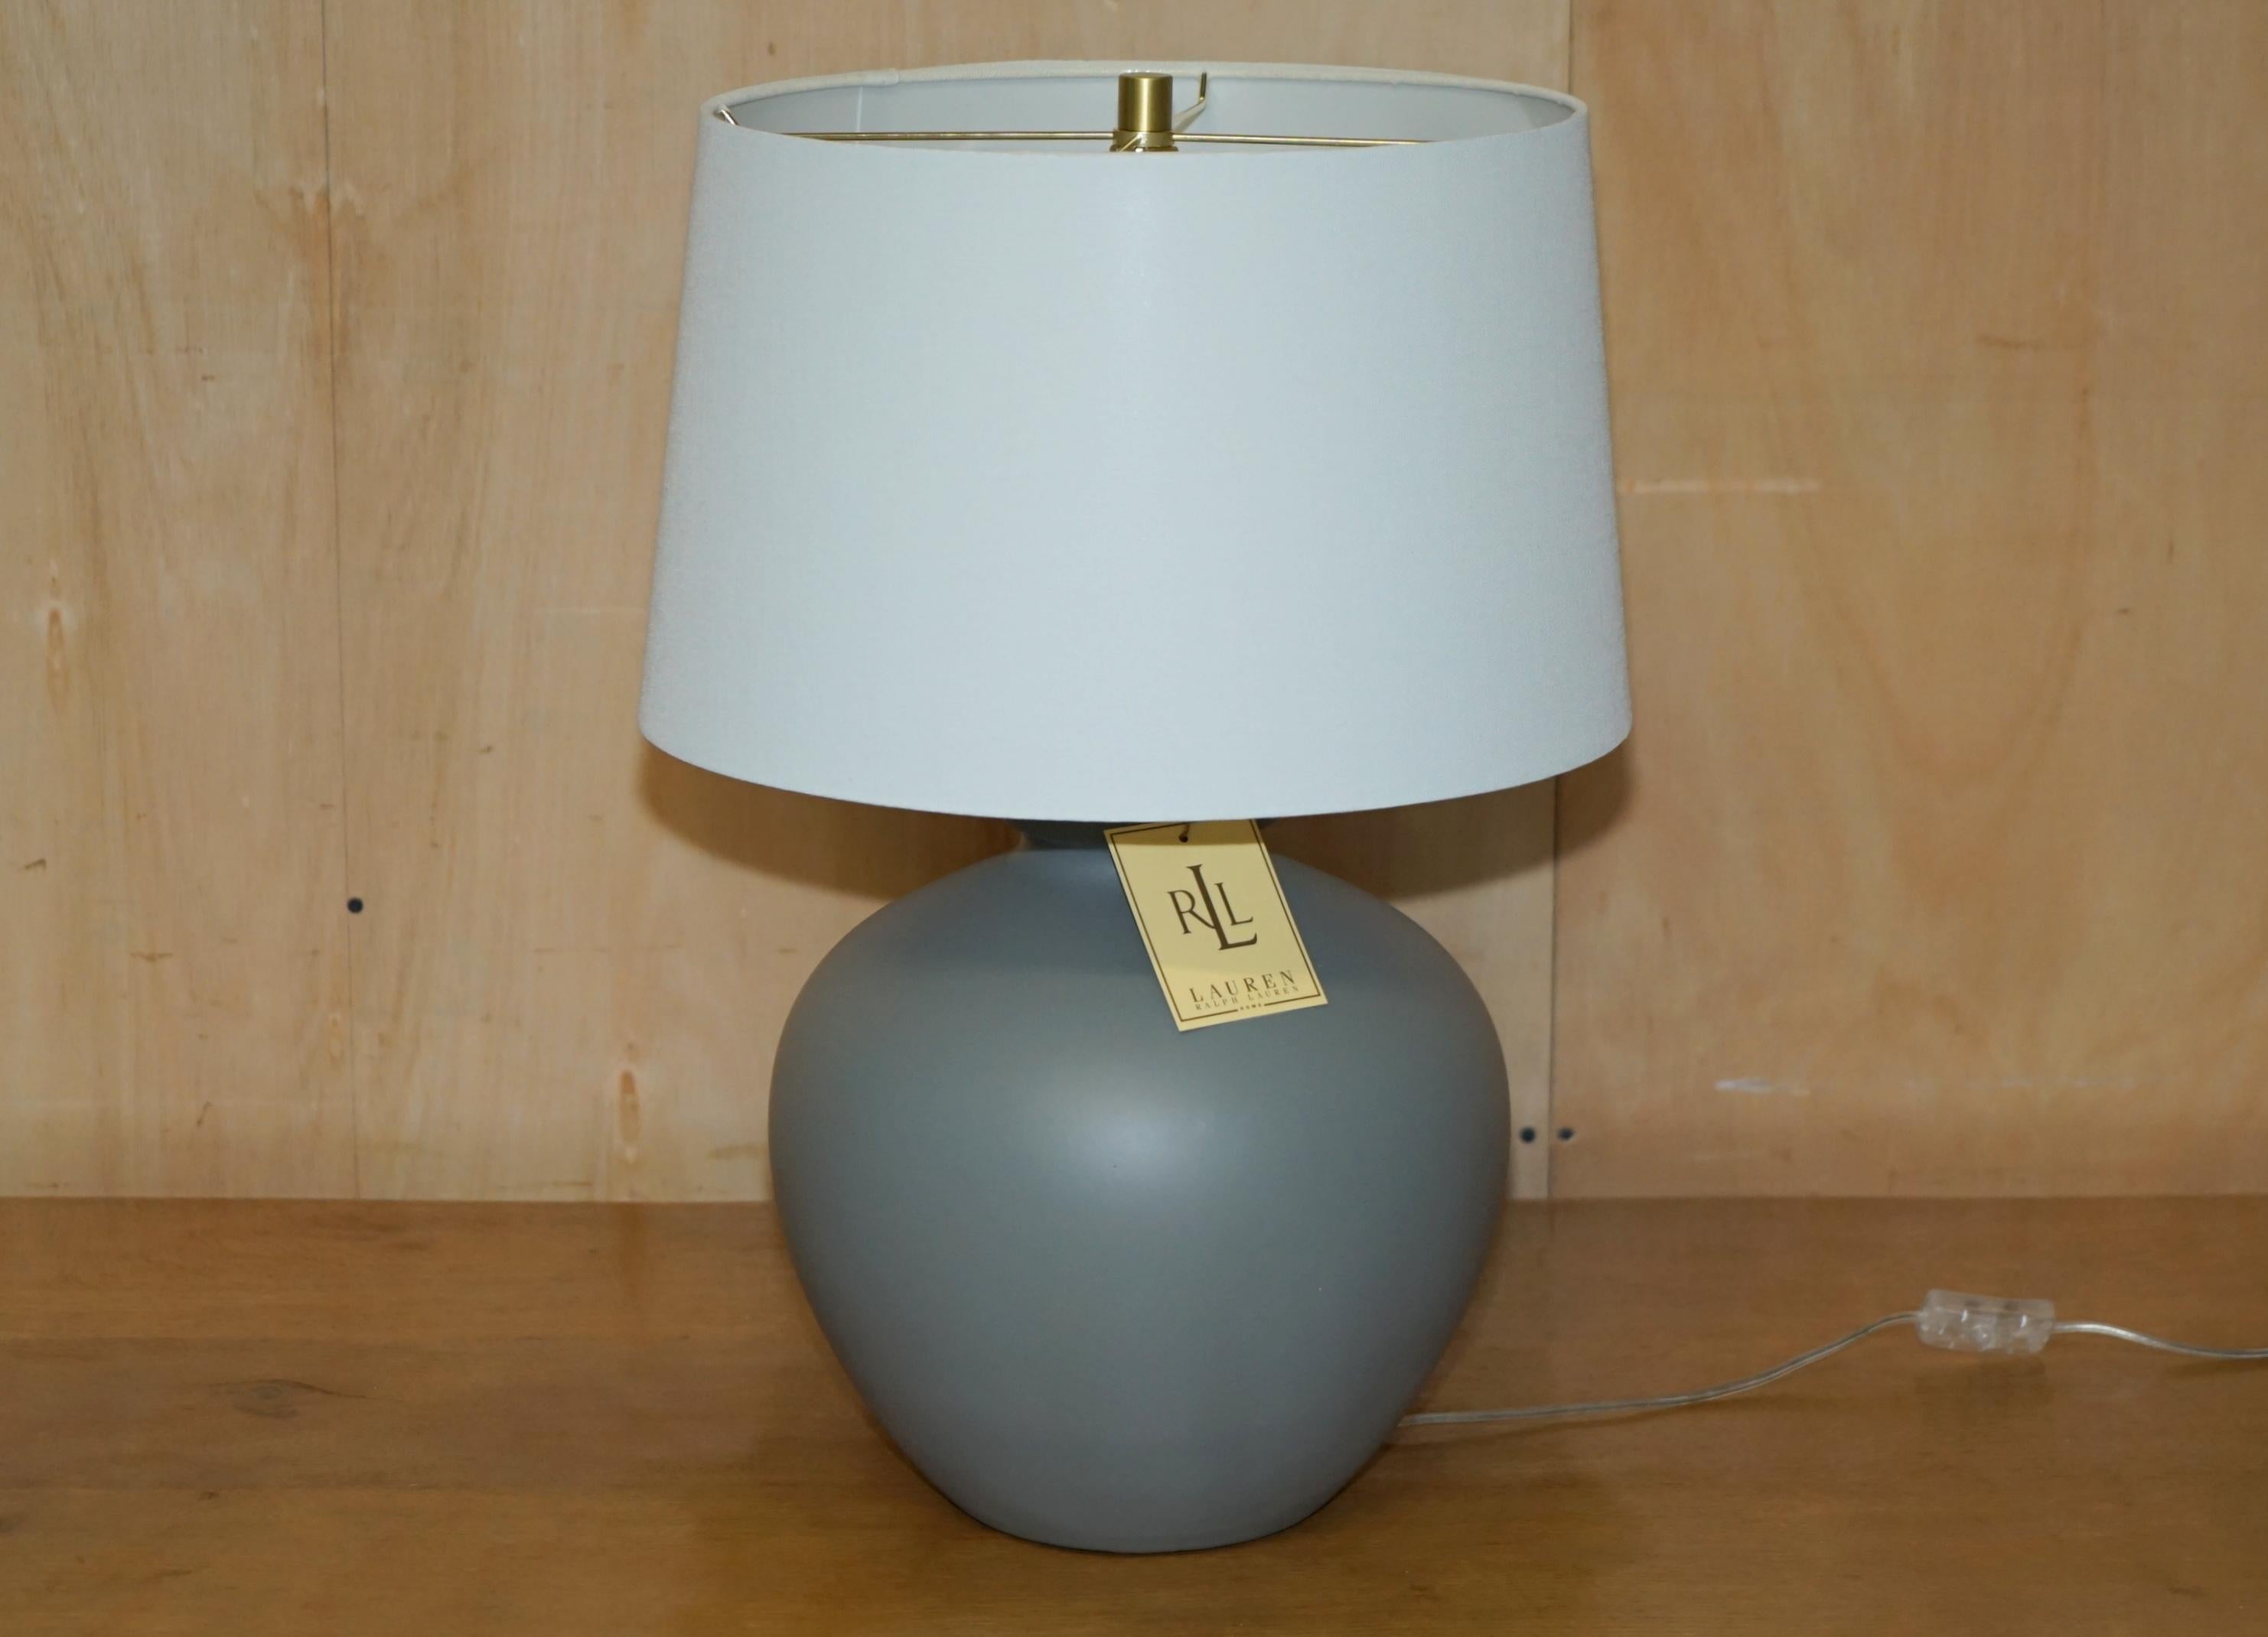 Royal House Antiques

Royal House Antiques is delighted to offer for sale 1 of 2 brand new in the original box Ralph Lauren ceramic grey vase shaped table lamps

This lamp is part of a massive suite of Ralph Lauren lamps we bought for a show home